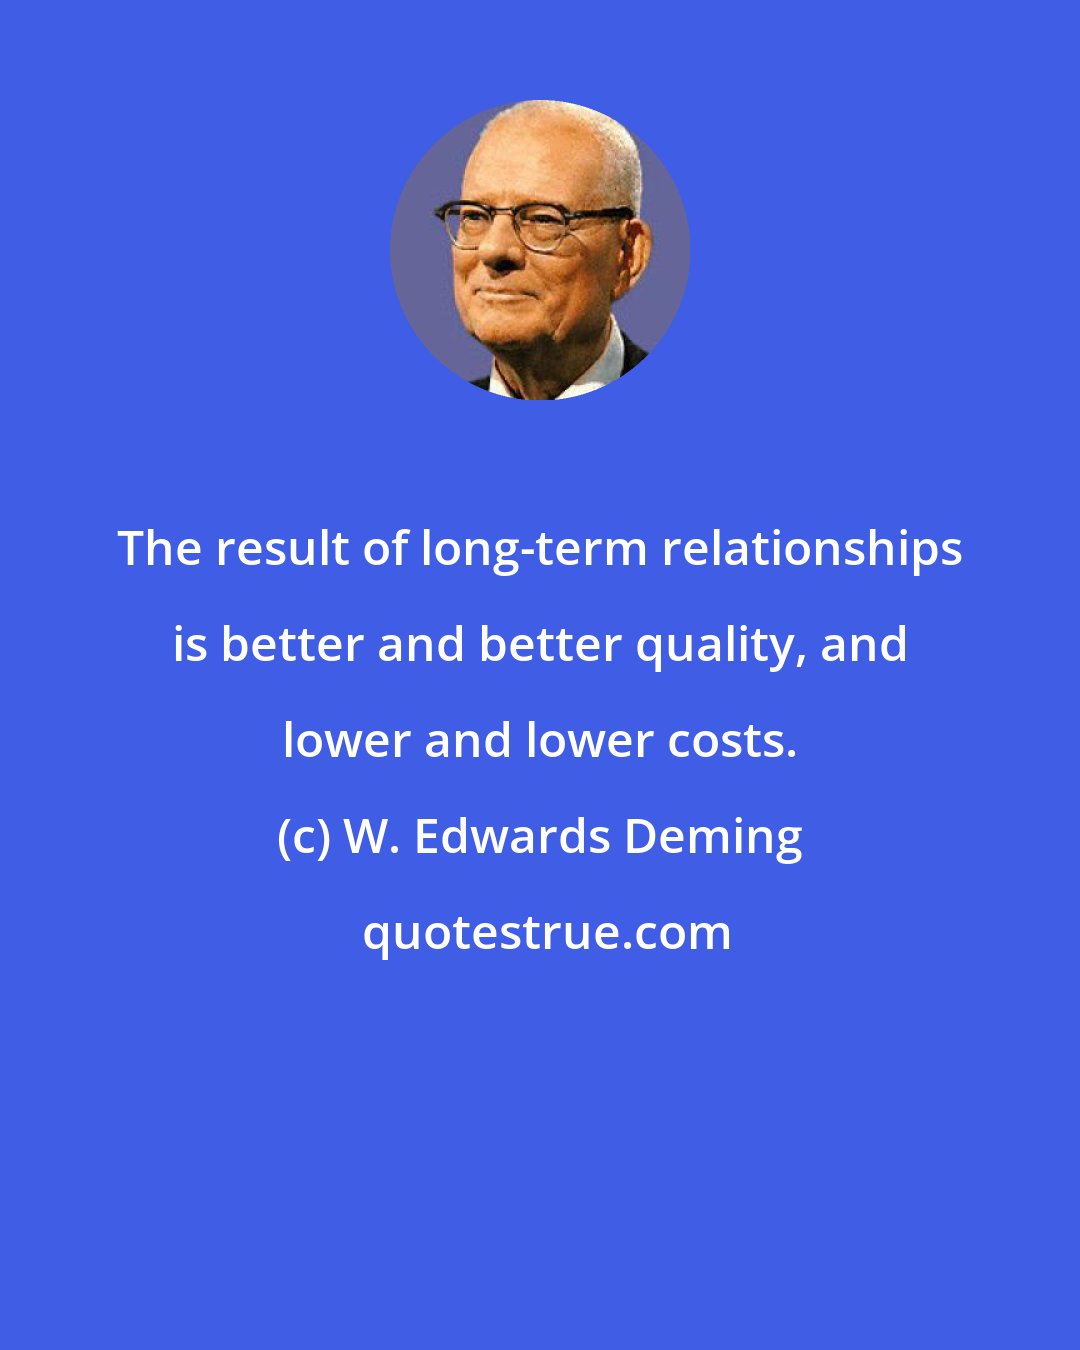 W. Edwards Deming: The result of long-term relationships is better and better quality, and lower and lower costs.